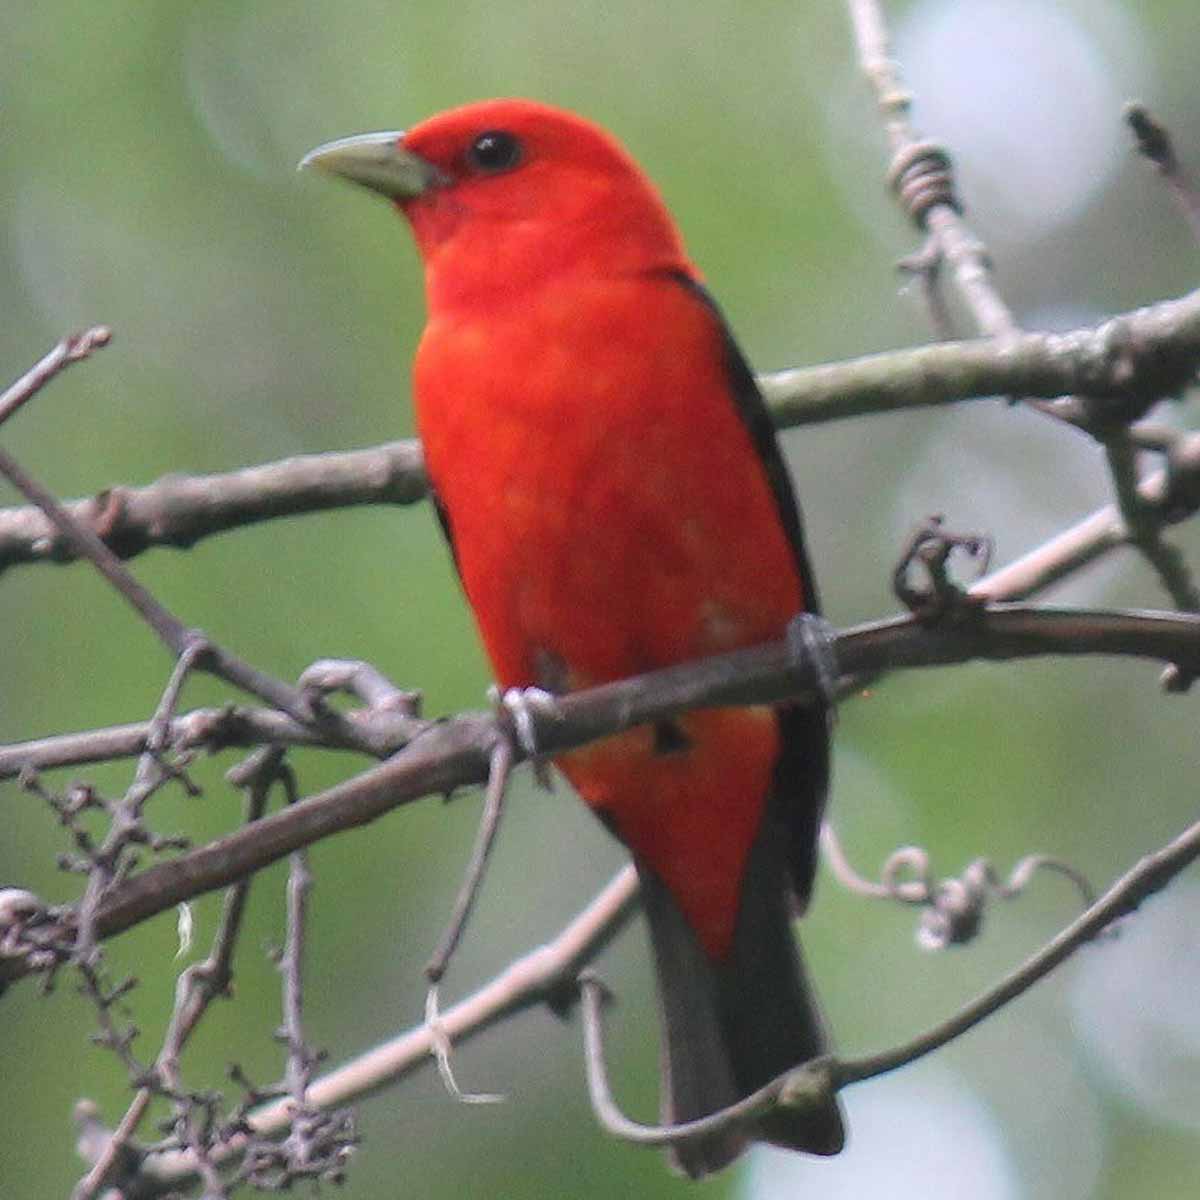 The image captures a stunning close-up view of a male scarlet tanager, shot from the front with the bird's head tilted sharply to the left. The tanager's vibrant, scarlet-red plumage covers its entire head and body, contrasting dramatically with its black wings. The bird's small, sharp beak and alert, tilted expression give it an inquisitive, almost quizzical appearance as it surveys its surroundings. The tanager's chest is prominently displayed, showcasing the rich, saturated red coloration that is a defining feature of this species. The blurred, out-of-focus background places all the emphasis on the tanager's striking visual details and unique head positioning, creating an engaging, dynamic portrait of this beautiful songbird.
